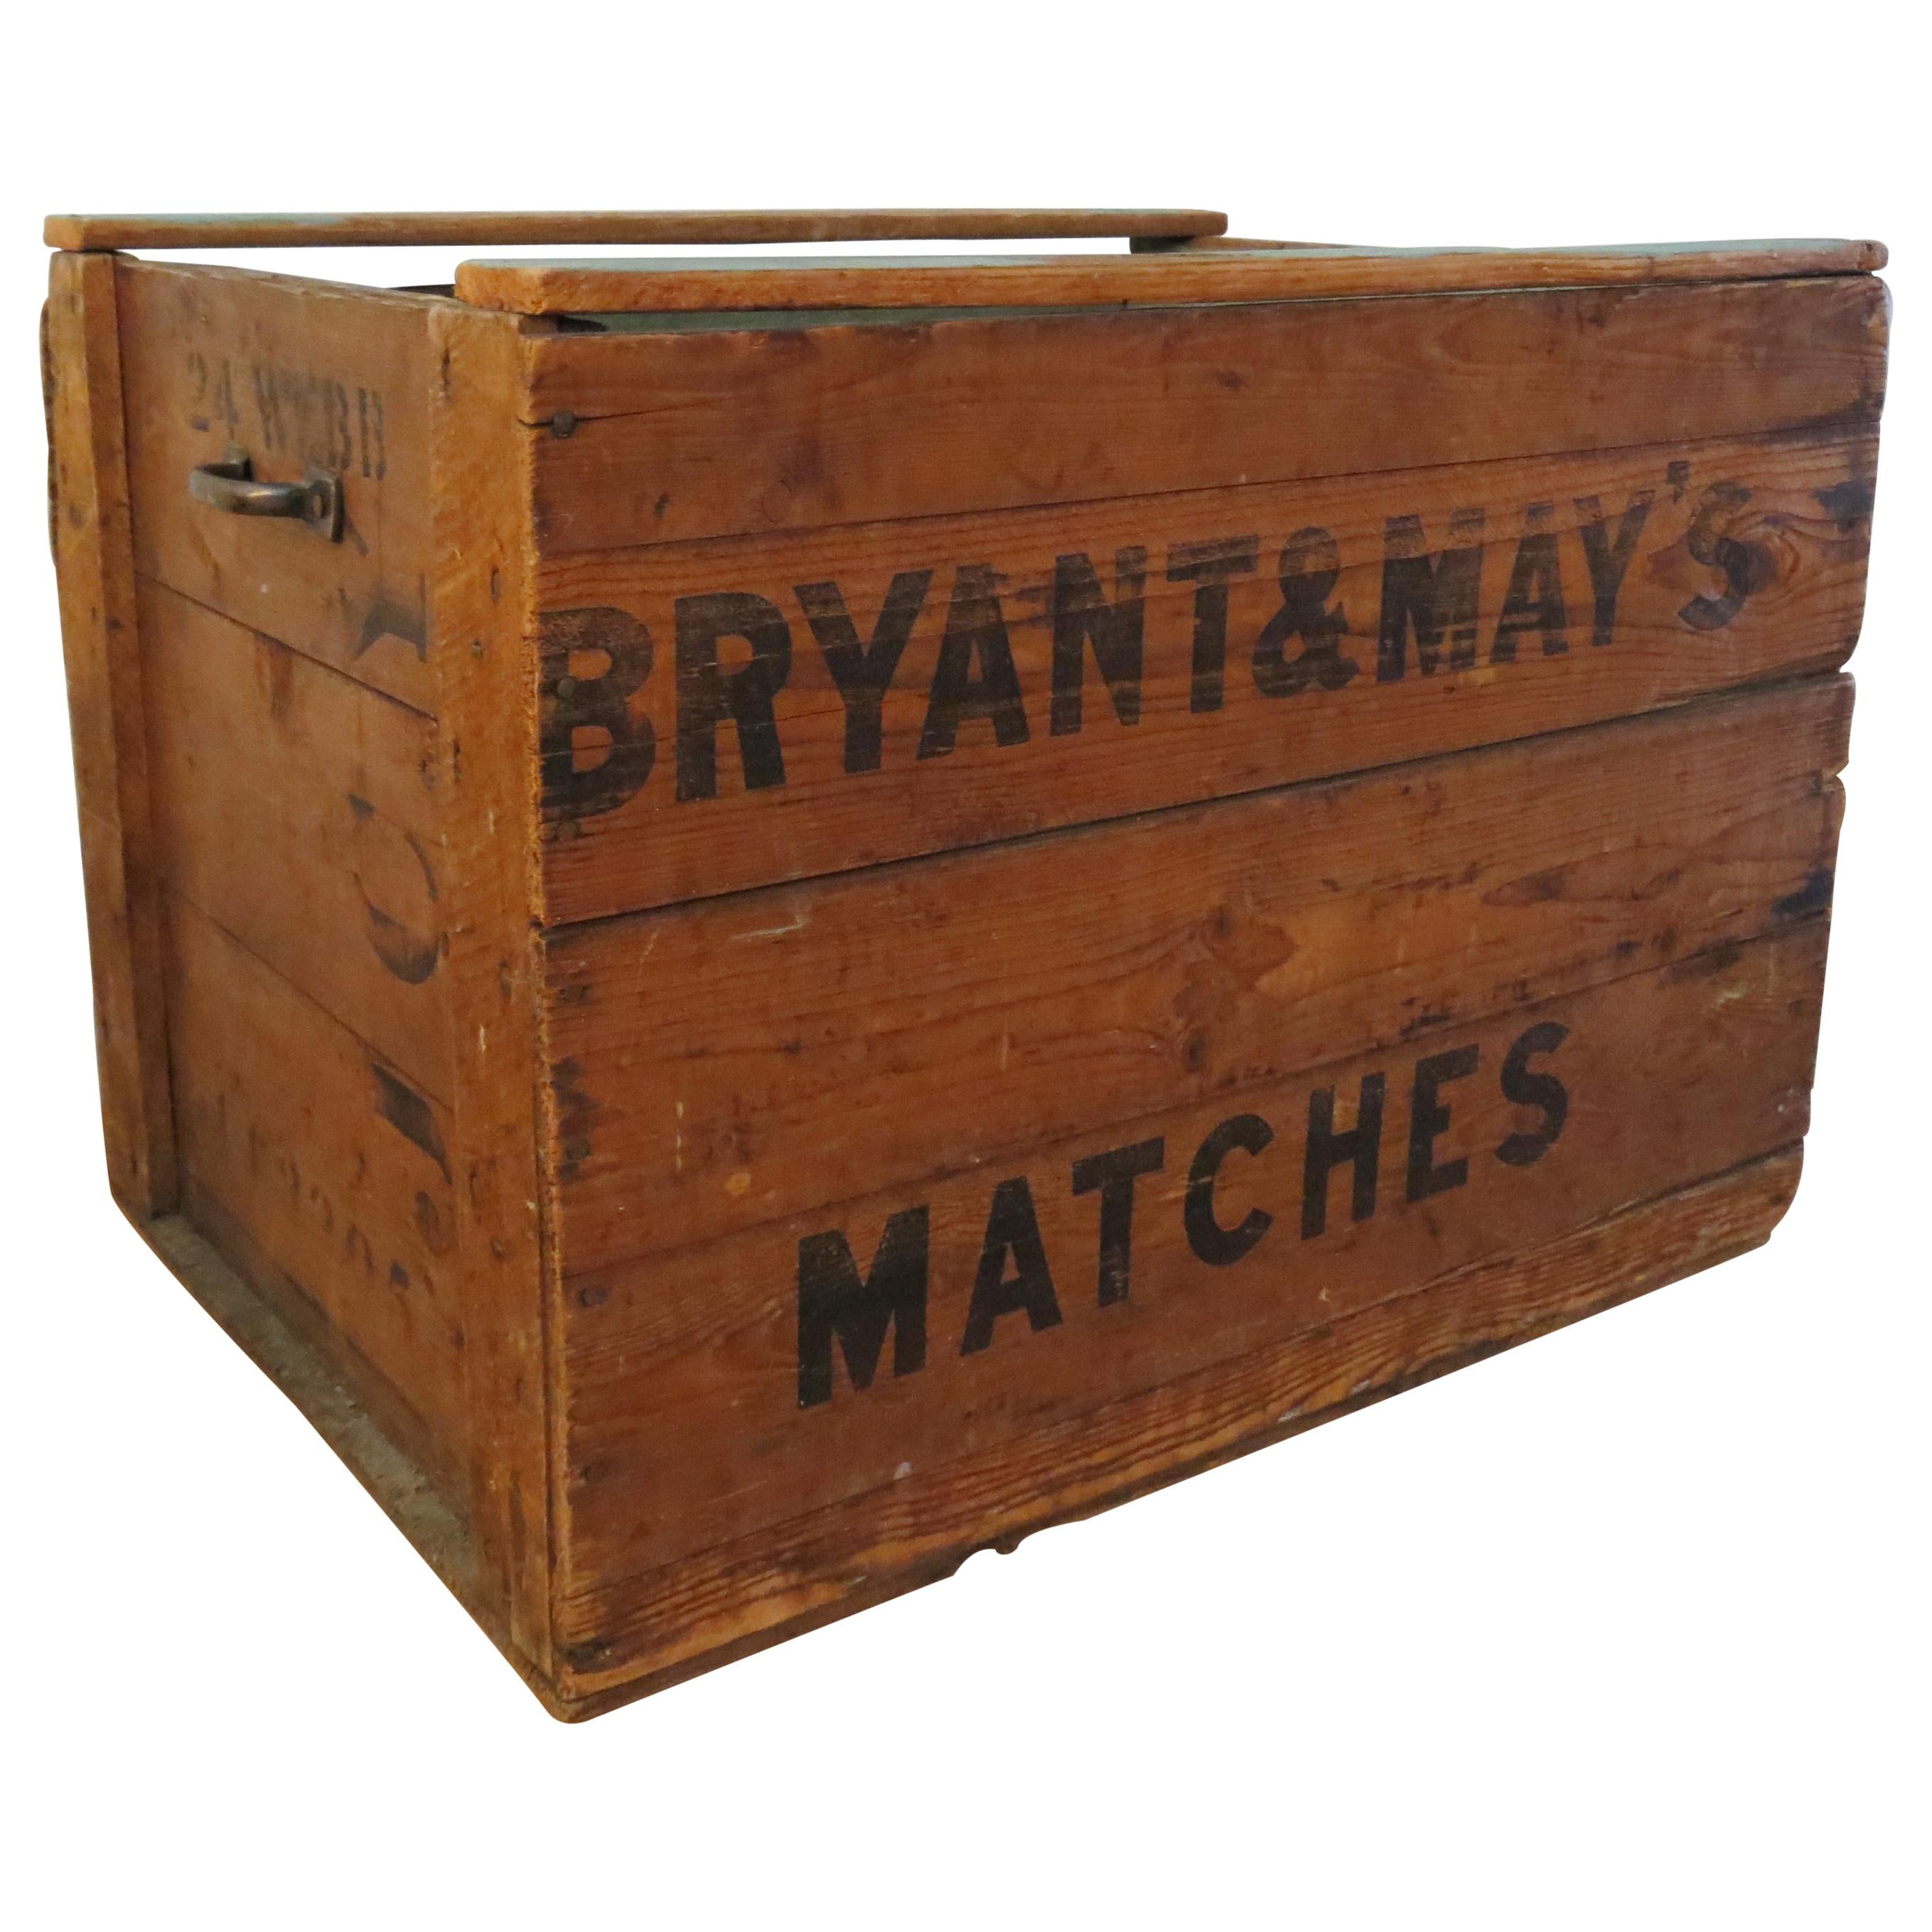 Vintage Bryant And May Matches Large Pine Wooden Industrial Storage Box, 1950s